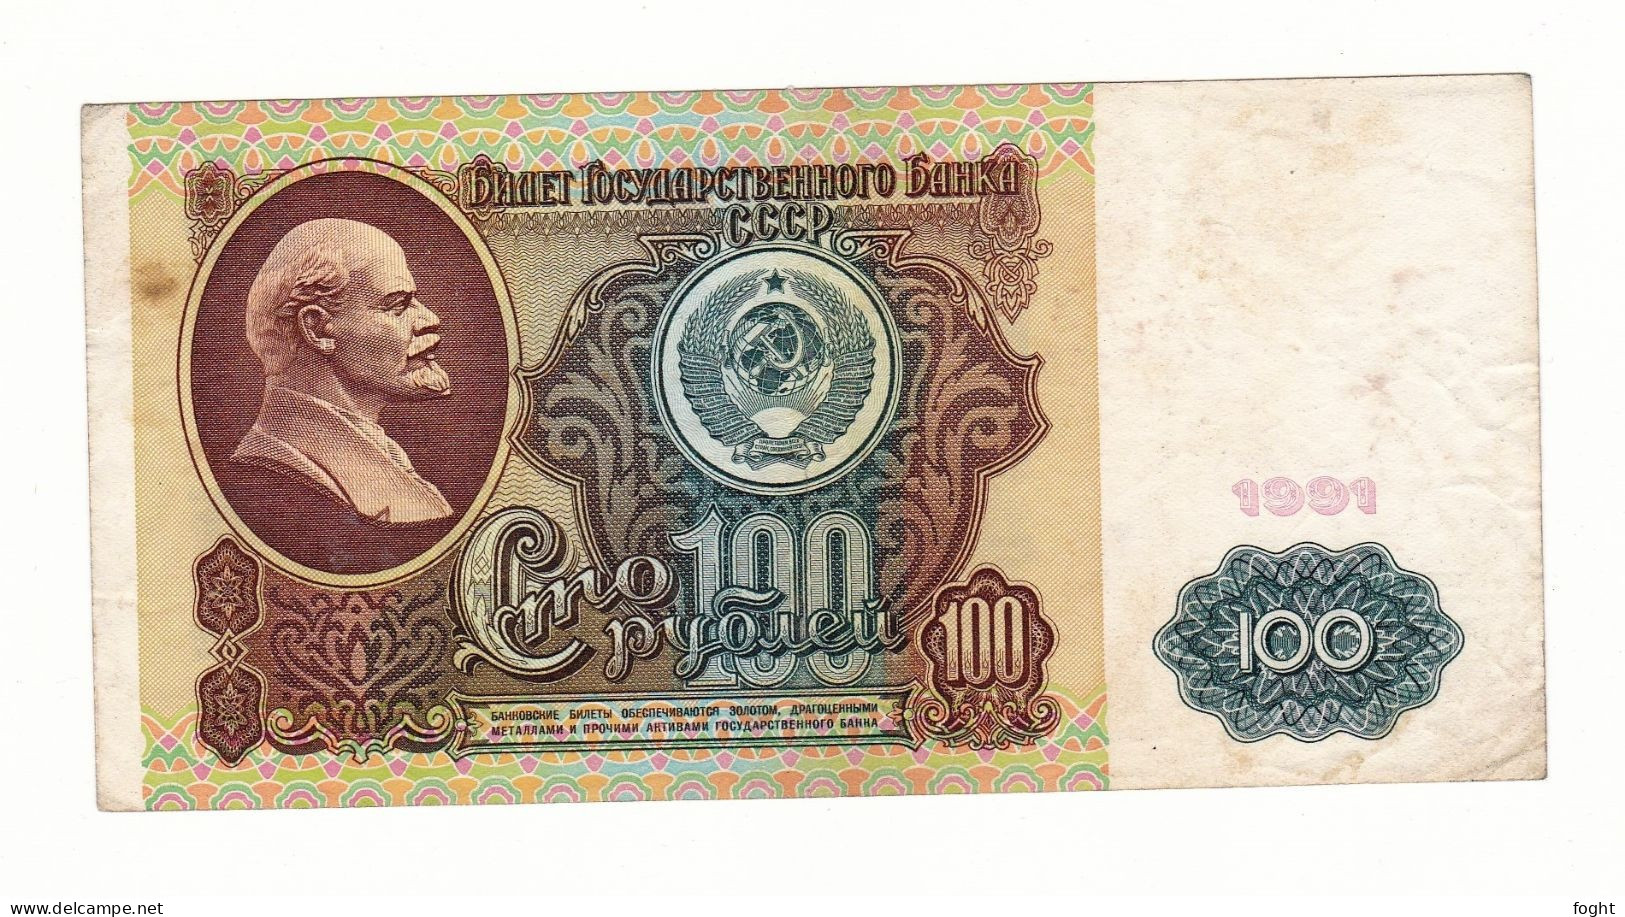 1991 Russia State Bank Note U.S.S.R. Banknote 100 Rubles,P#242A - Russland